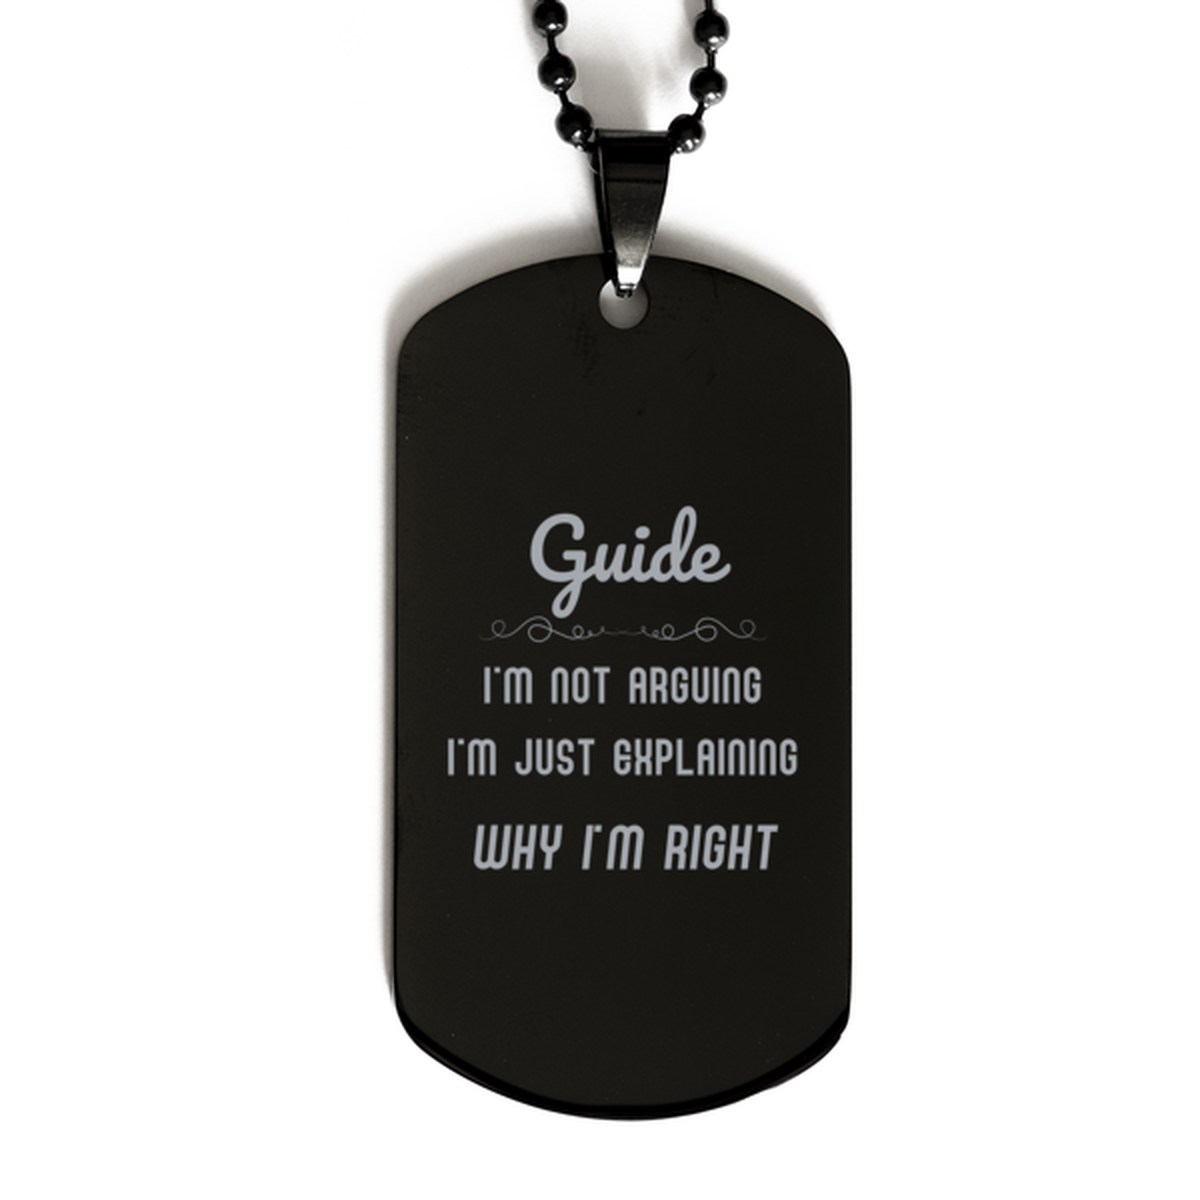 Guide I'm not Arguing. I'm Just Explaining Why I'm RIGHT Black Dog Tag, Funny Saying Quote Guide Gifts For Guide Graduation Birthday Christmas Gifts for Men Women Coworker